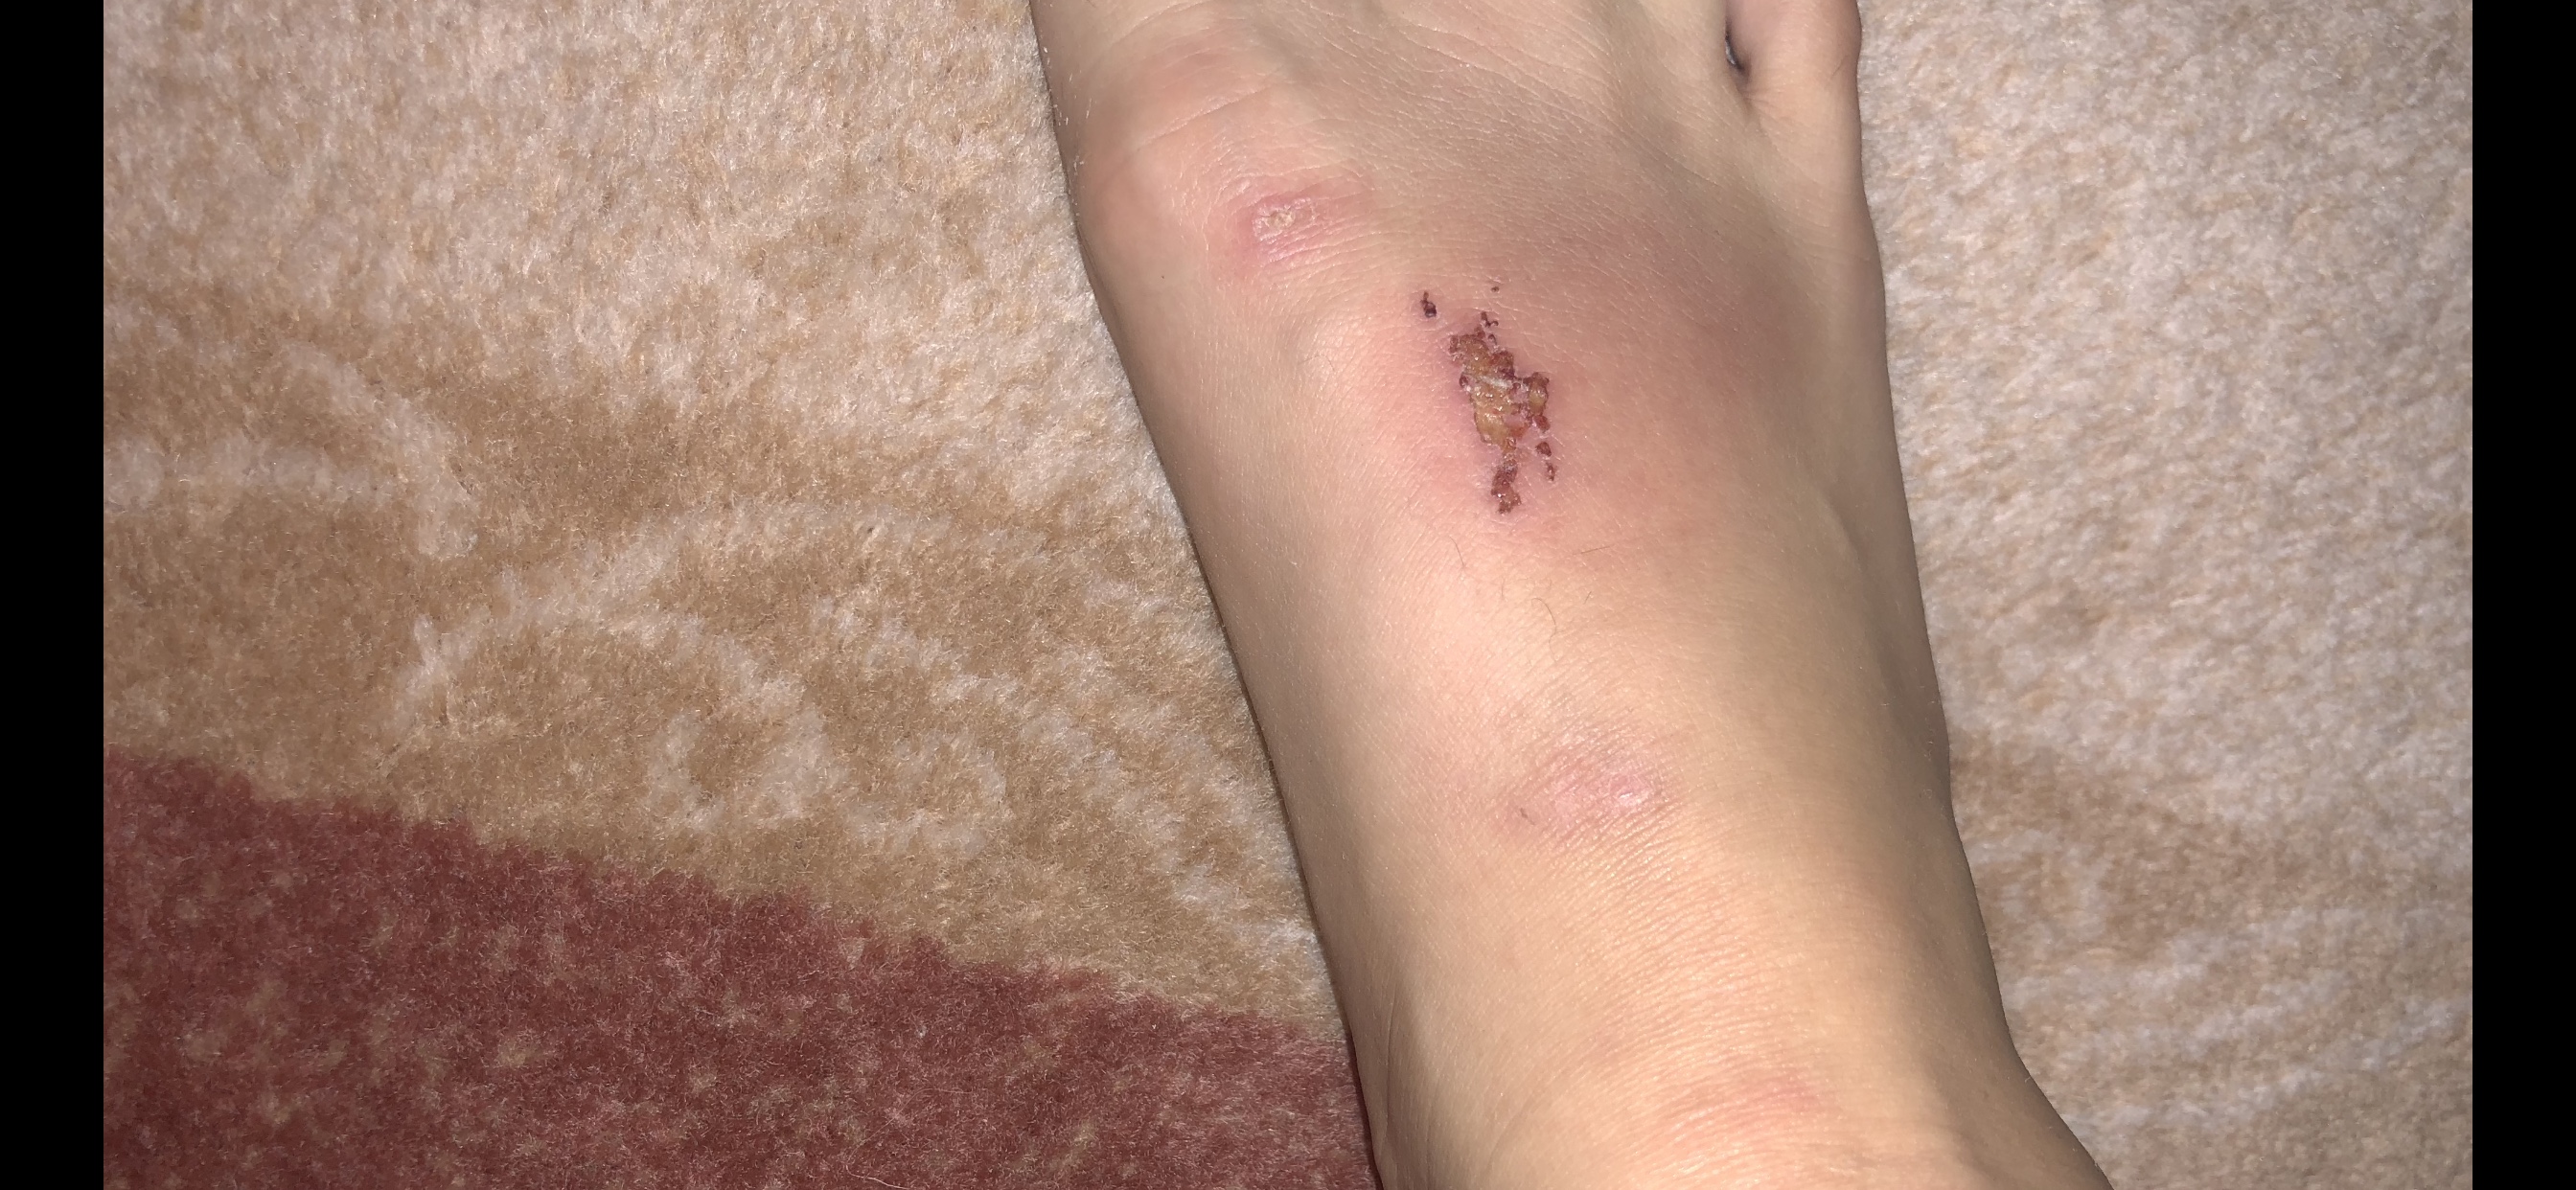 Courtesy: Anna Kostenko. 
(Anna's foot after a training session)